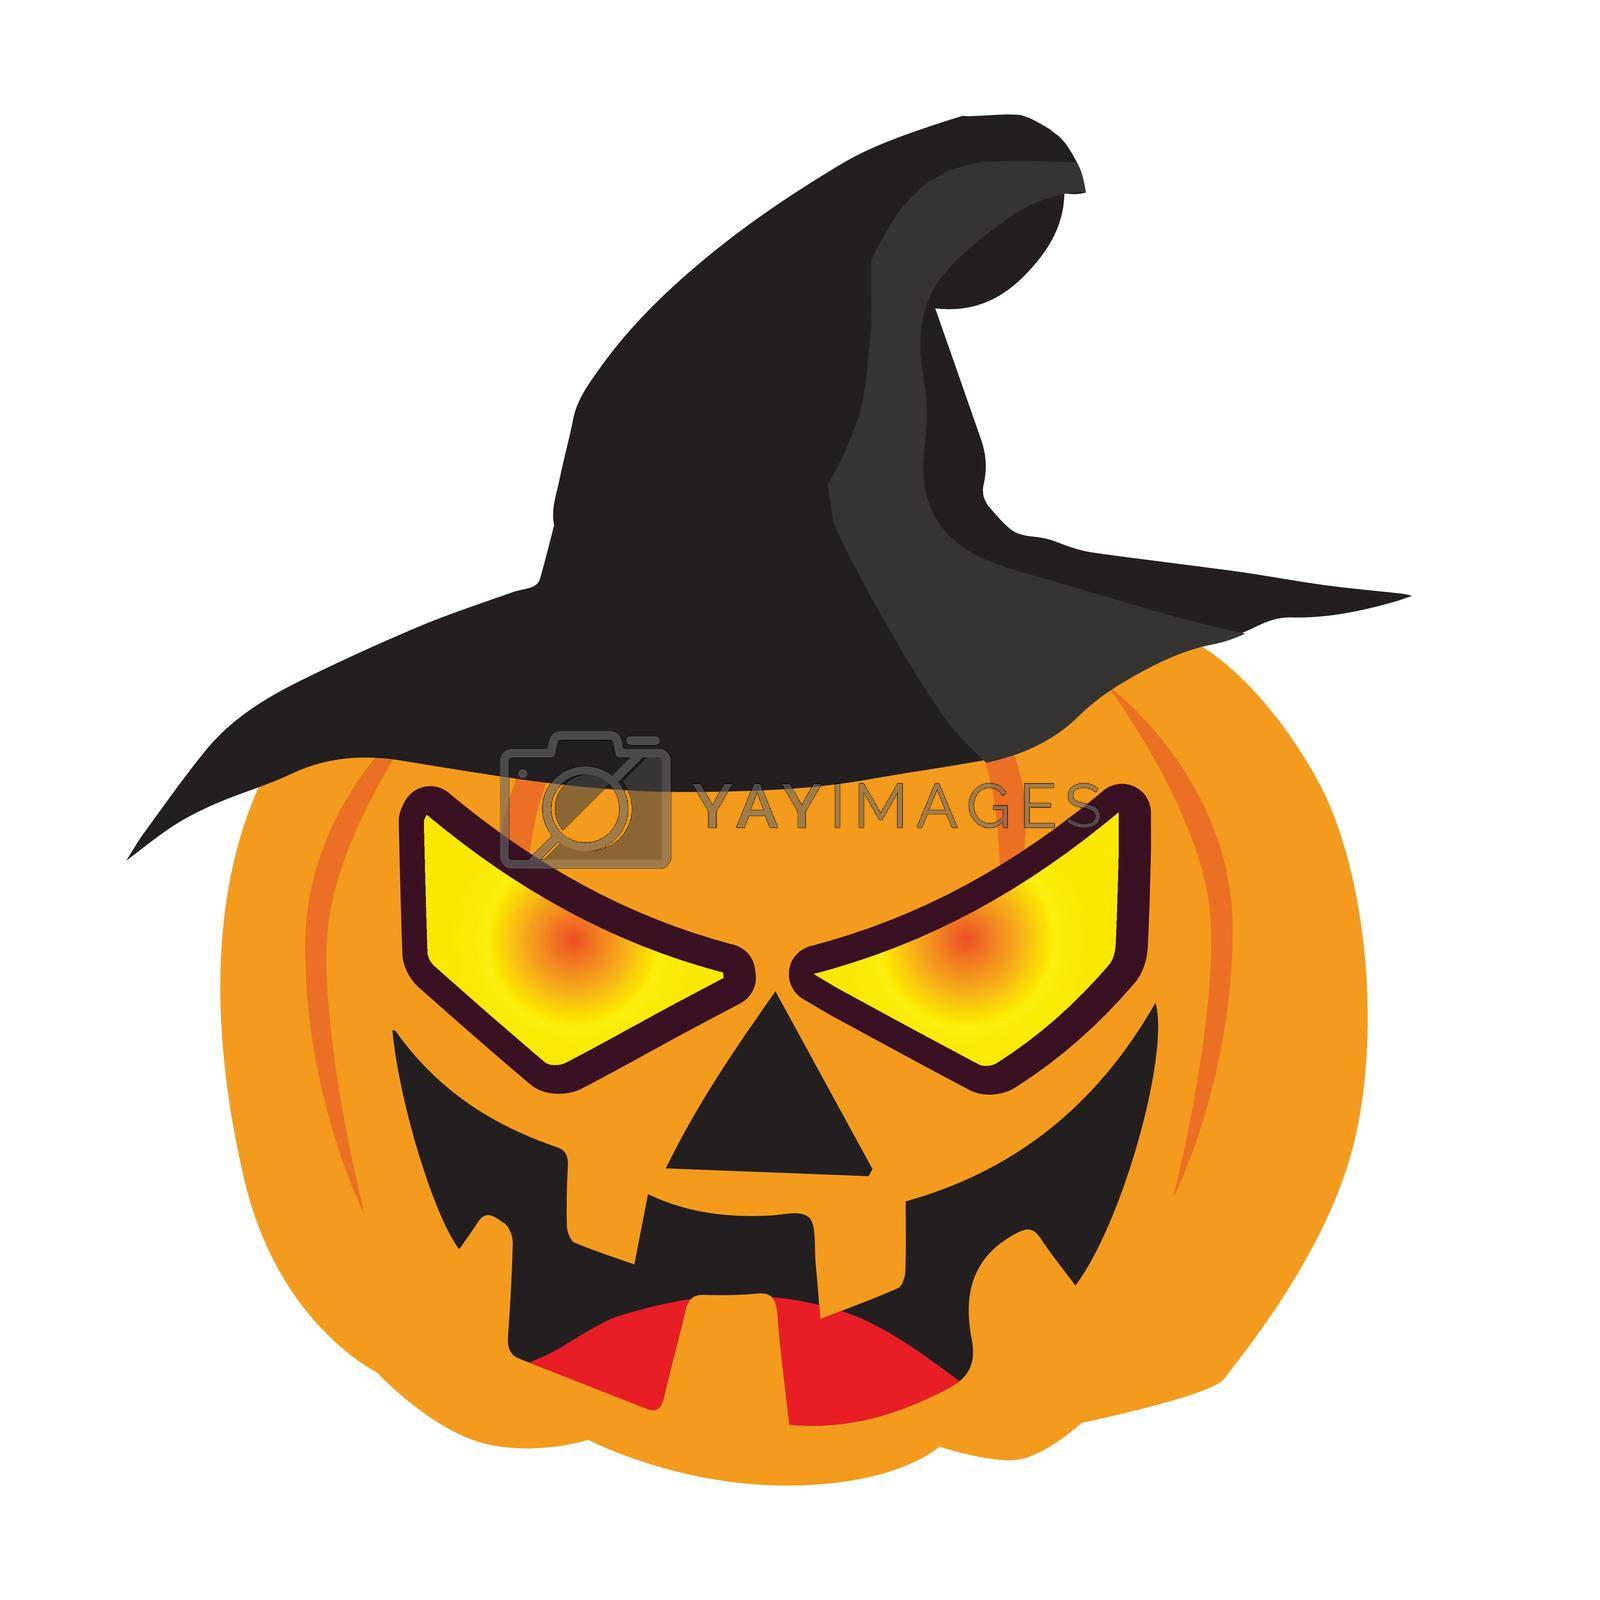 Royalty free image of Halloween spooky elements. Cartoon halloween spooky evil silhouettes by Photographeeasia